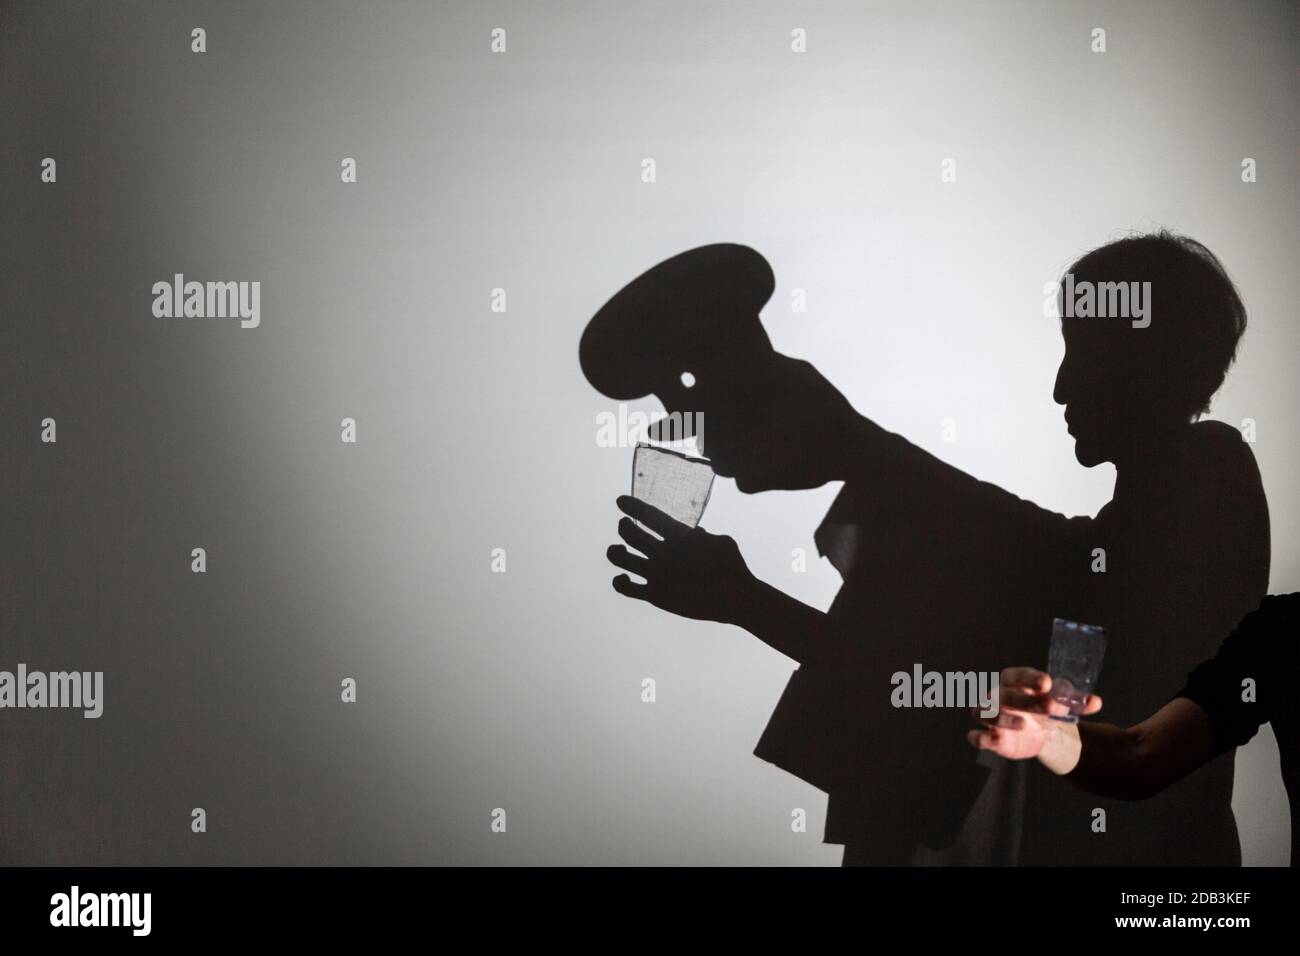 play shadow projected on a white screen. the person's hands shape a cook drinking from a glass Stock Photo